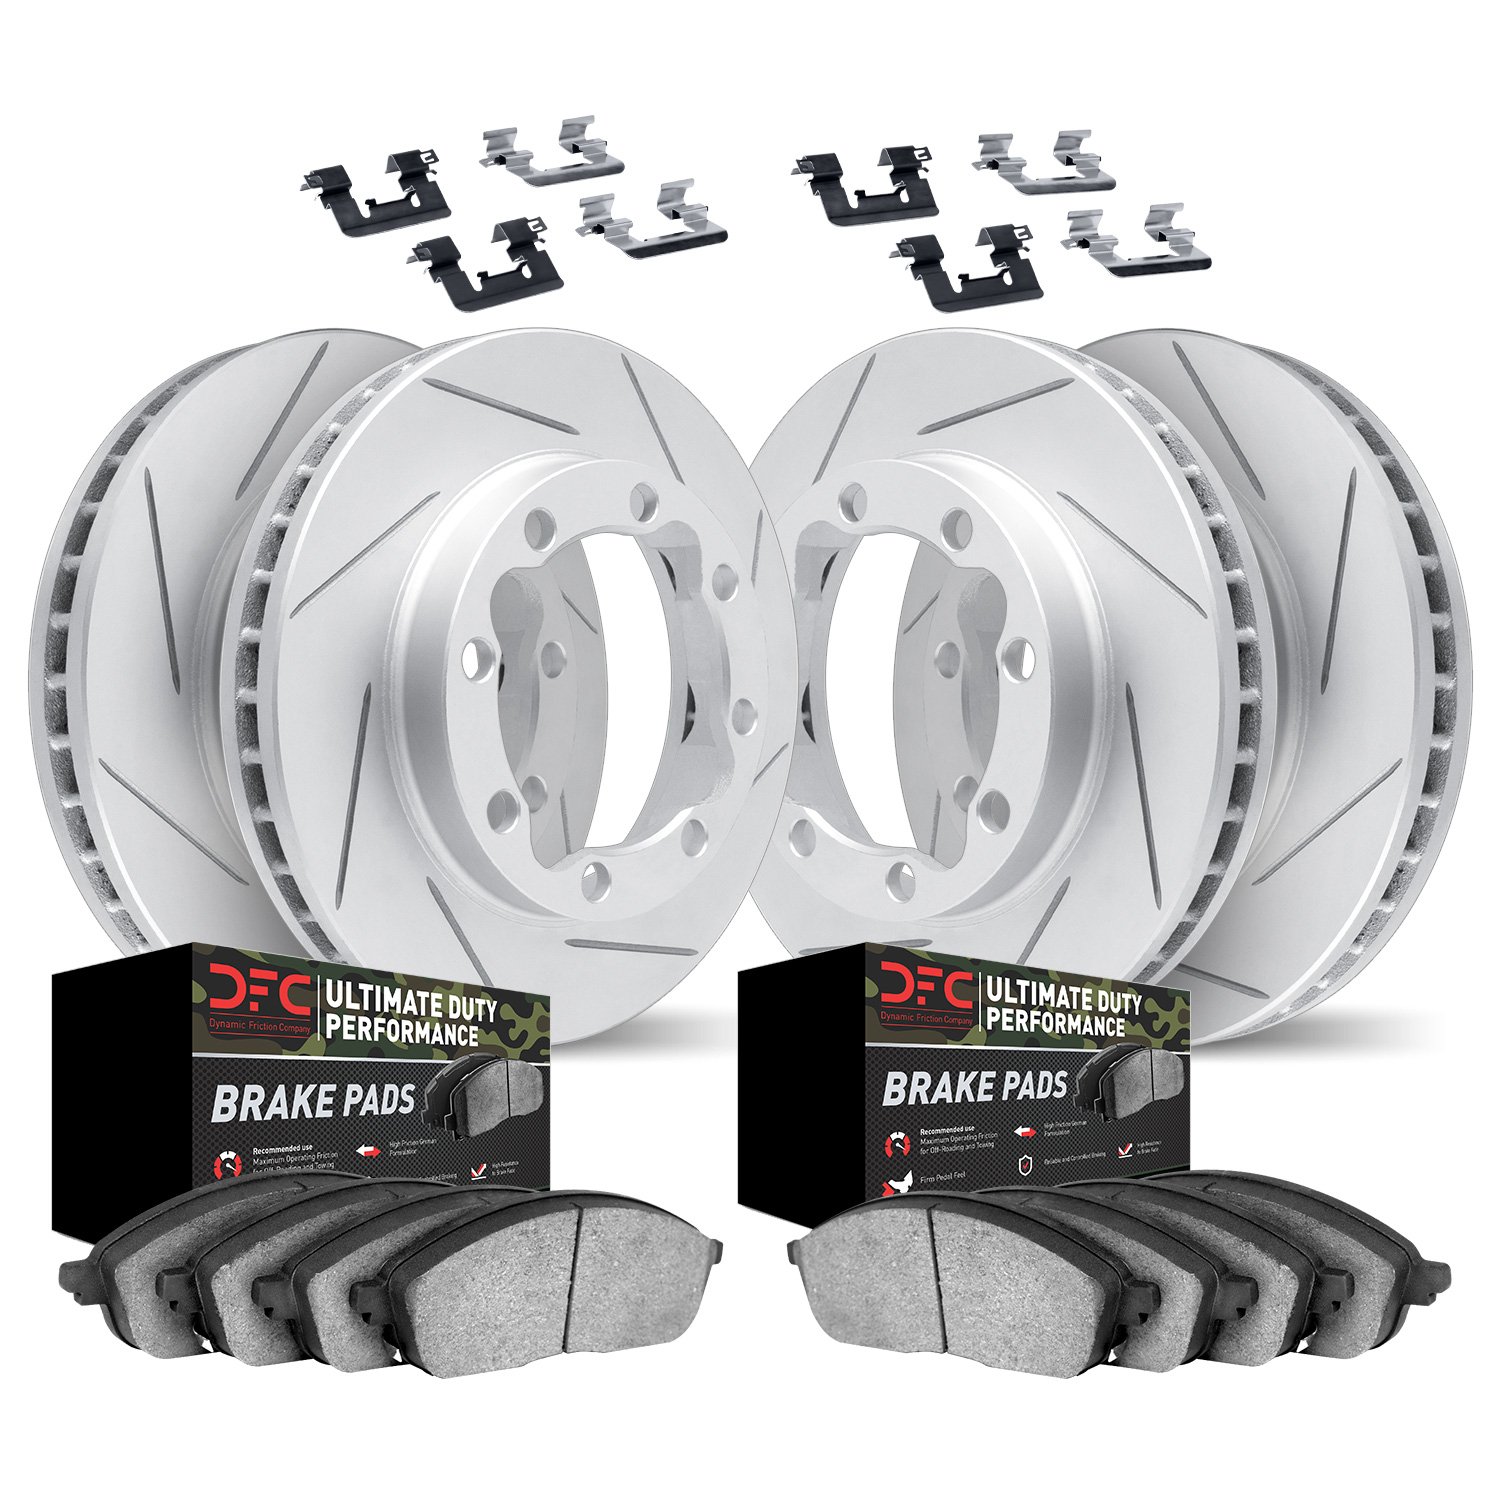 Geoperformance Slotted Brake Rotors with Ultimate-Duty Brake Pads